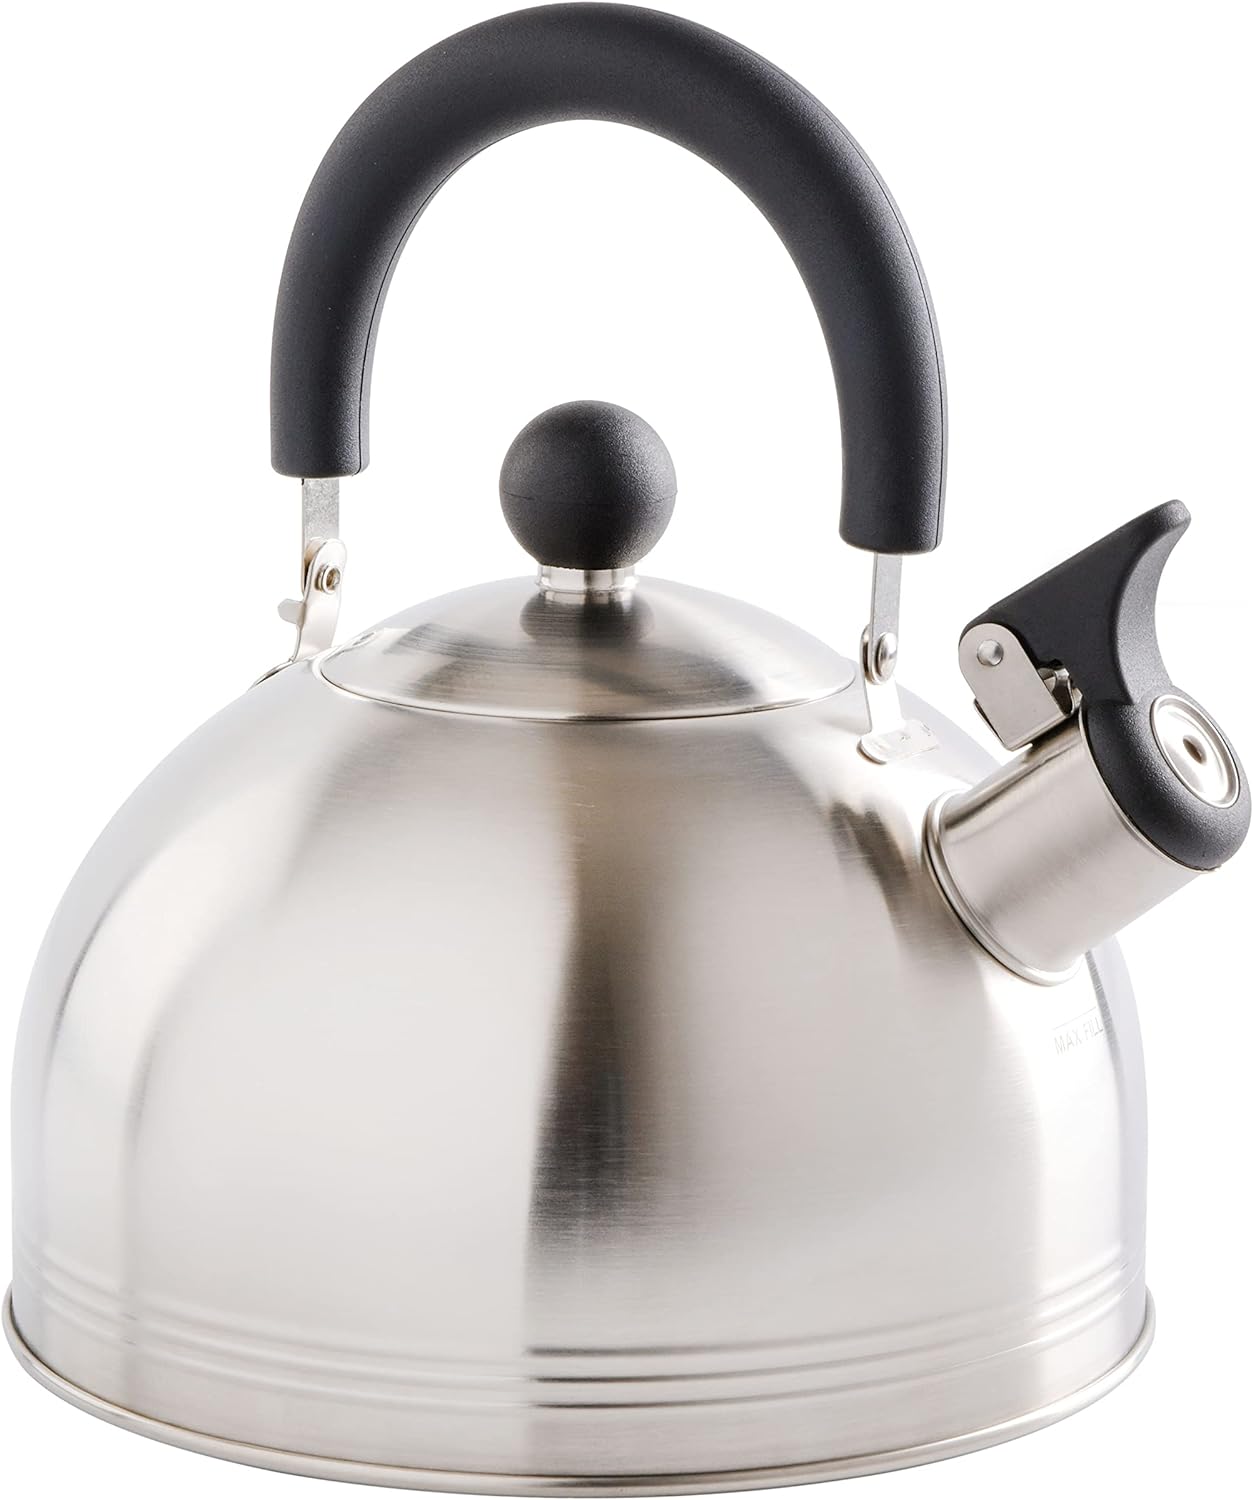 Good quality sturdy kettle with a loud whistle at a reasonable price